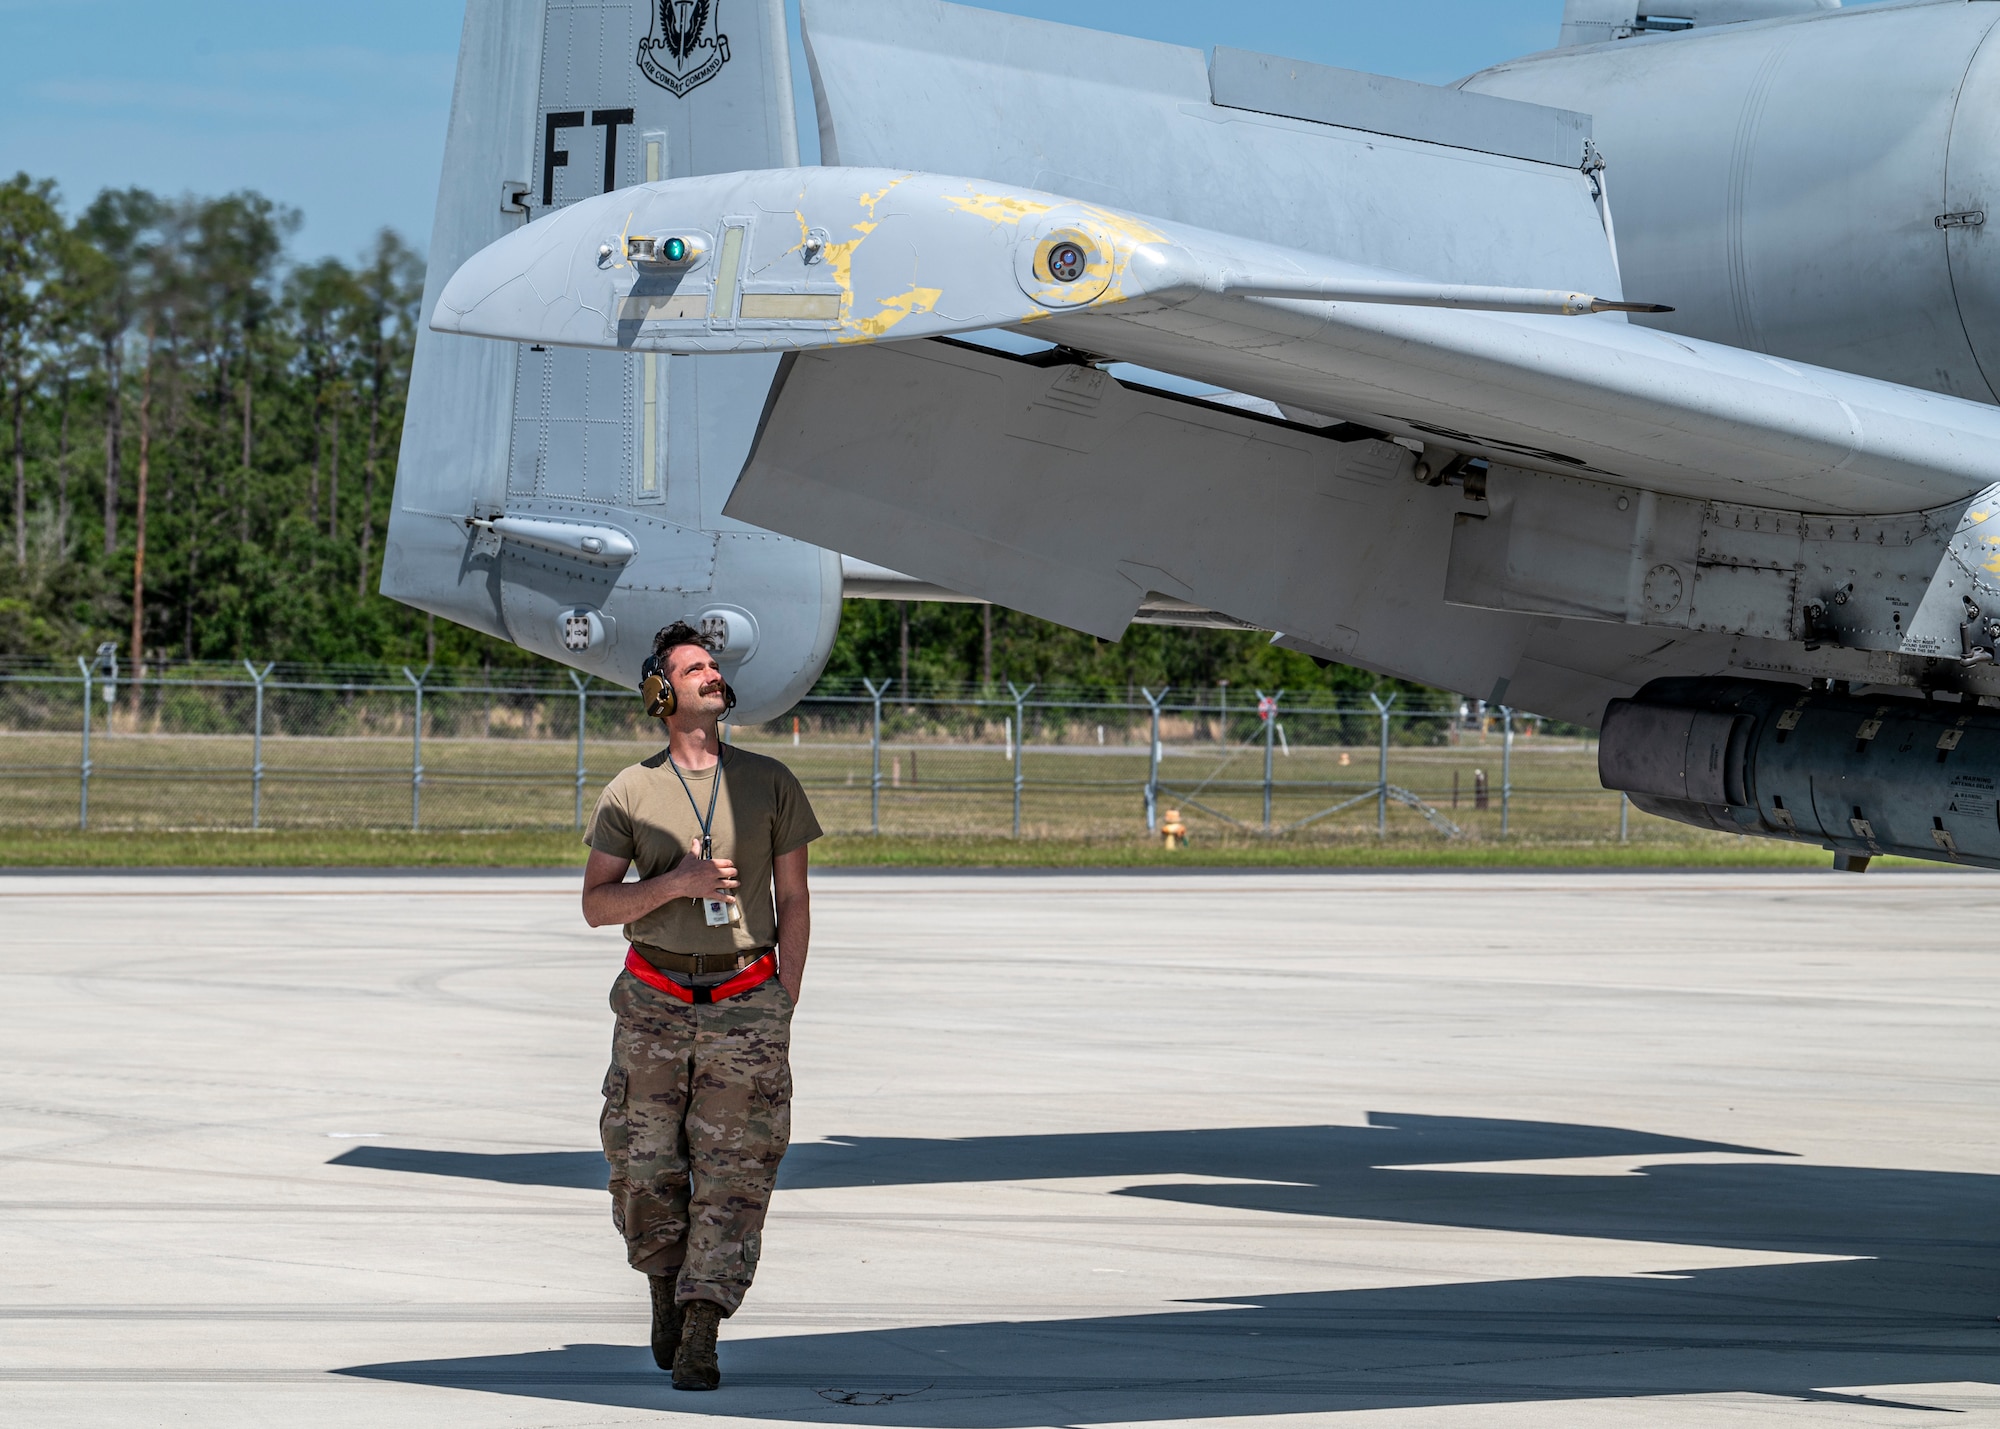 A U.S. Air Force Airman assigned to the 74th Fighter Generation Squadron inspects an A-10C Thunderbolt II during Exercise Ready Tiger 24-1 at Avon Park Air Force Range, Florida, April 10, 2024. Tactical aircraft maintenance specialists ensure that every component of the aircraft is working in tandem to deliver air support and air power anywhere, anytime. Built upon Air Combat Command's directive to assert air power in contested environments, Exercise Ready Tiger 24-1 aims to test and enhance the 23rd Wing’s proficiency in executing Lead Wing and Expeditionary Air Base concepts through Agile Combat Employment and command and control operations. (U.S. Air Force photo by Airman 1st Class Leonid Soubbotine)